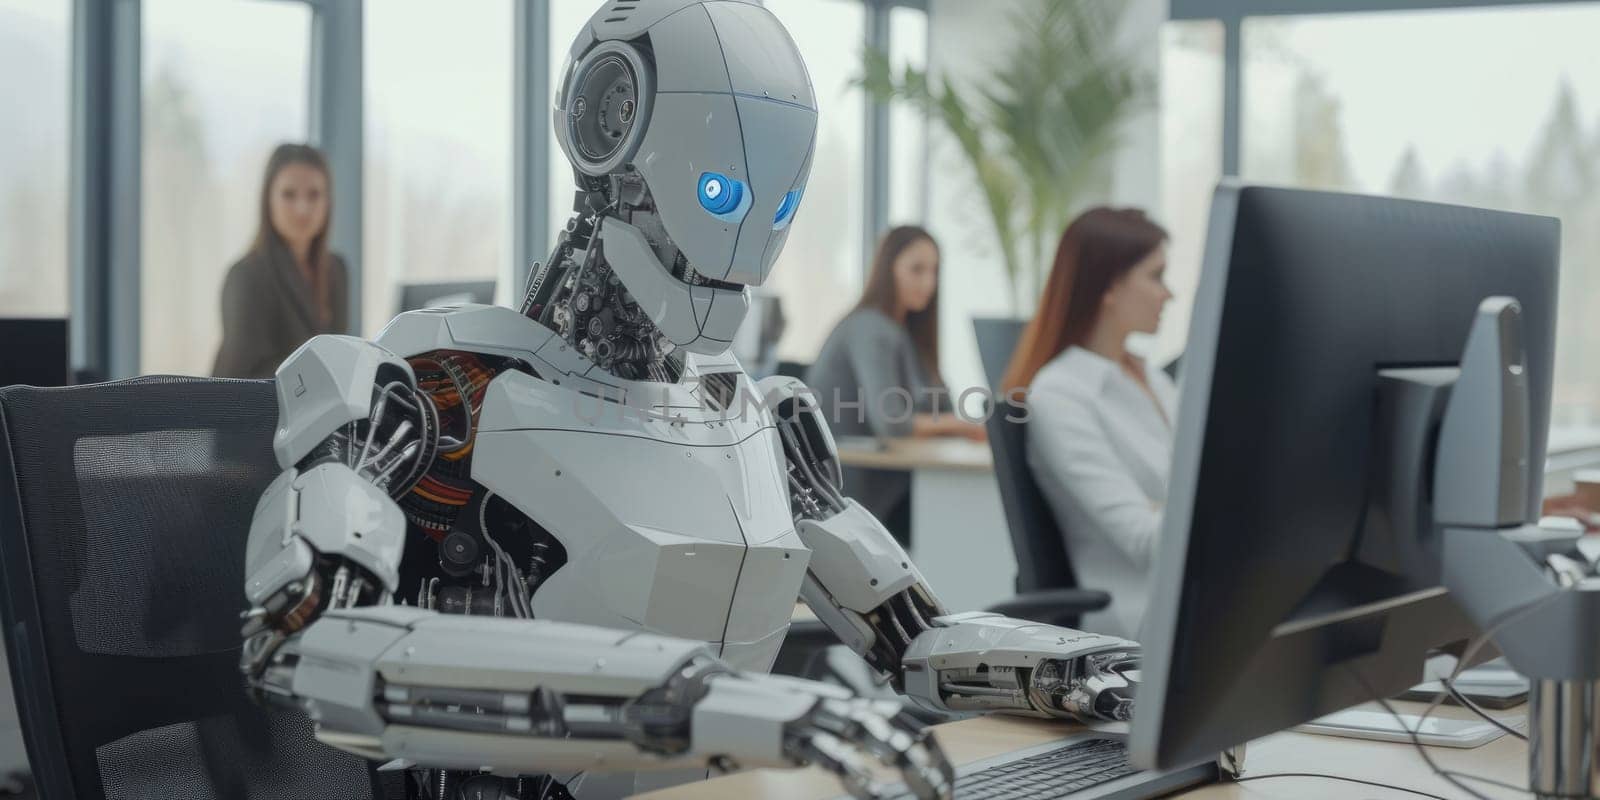 Futuristic Robot Working Alongside Humans in Office AIG41 by biancoblue